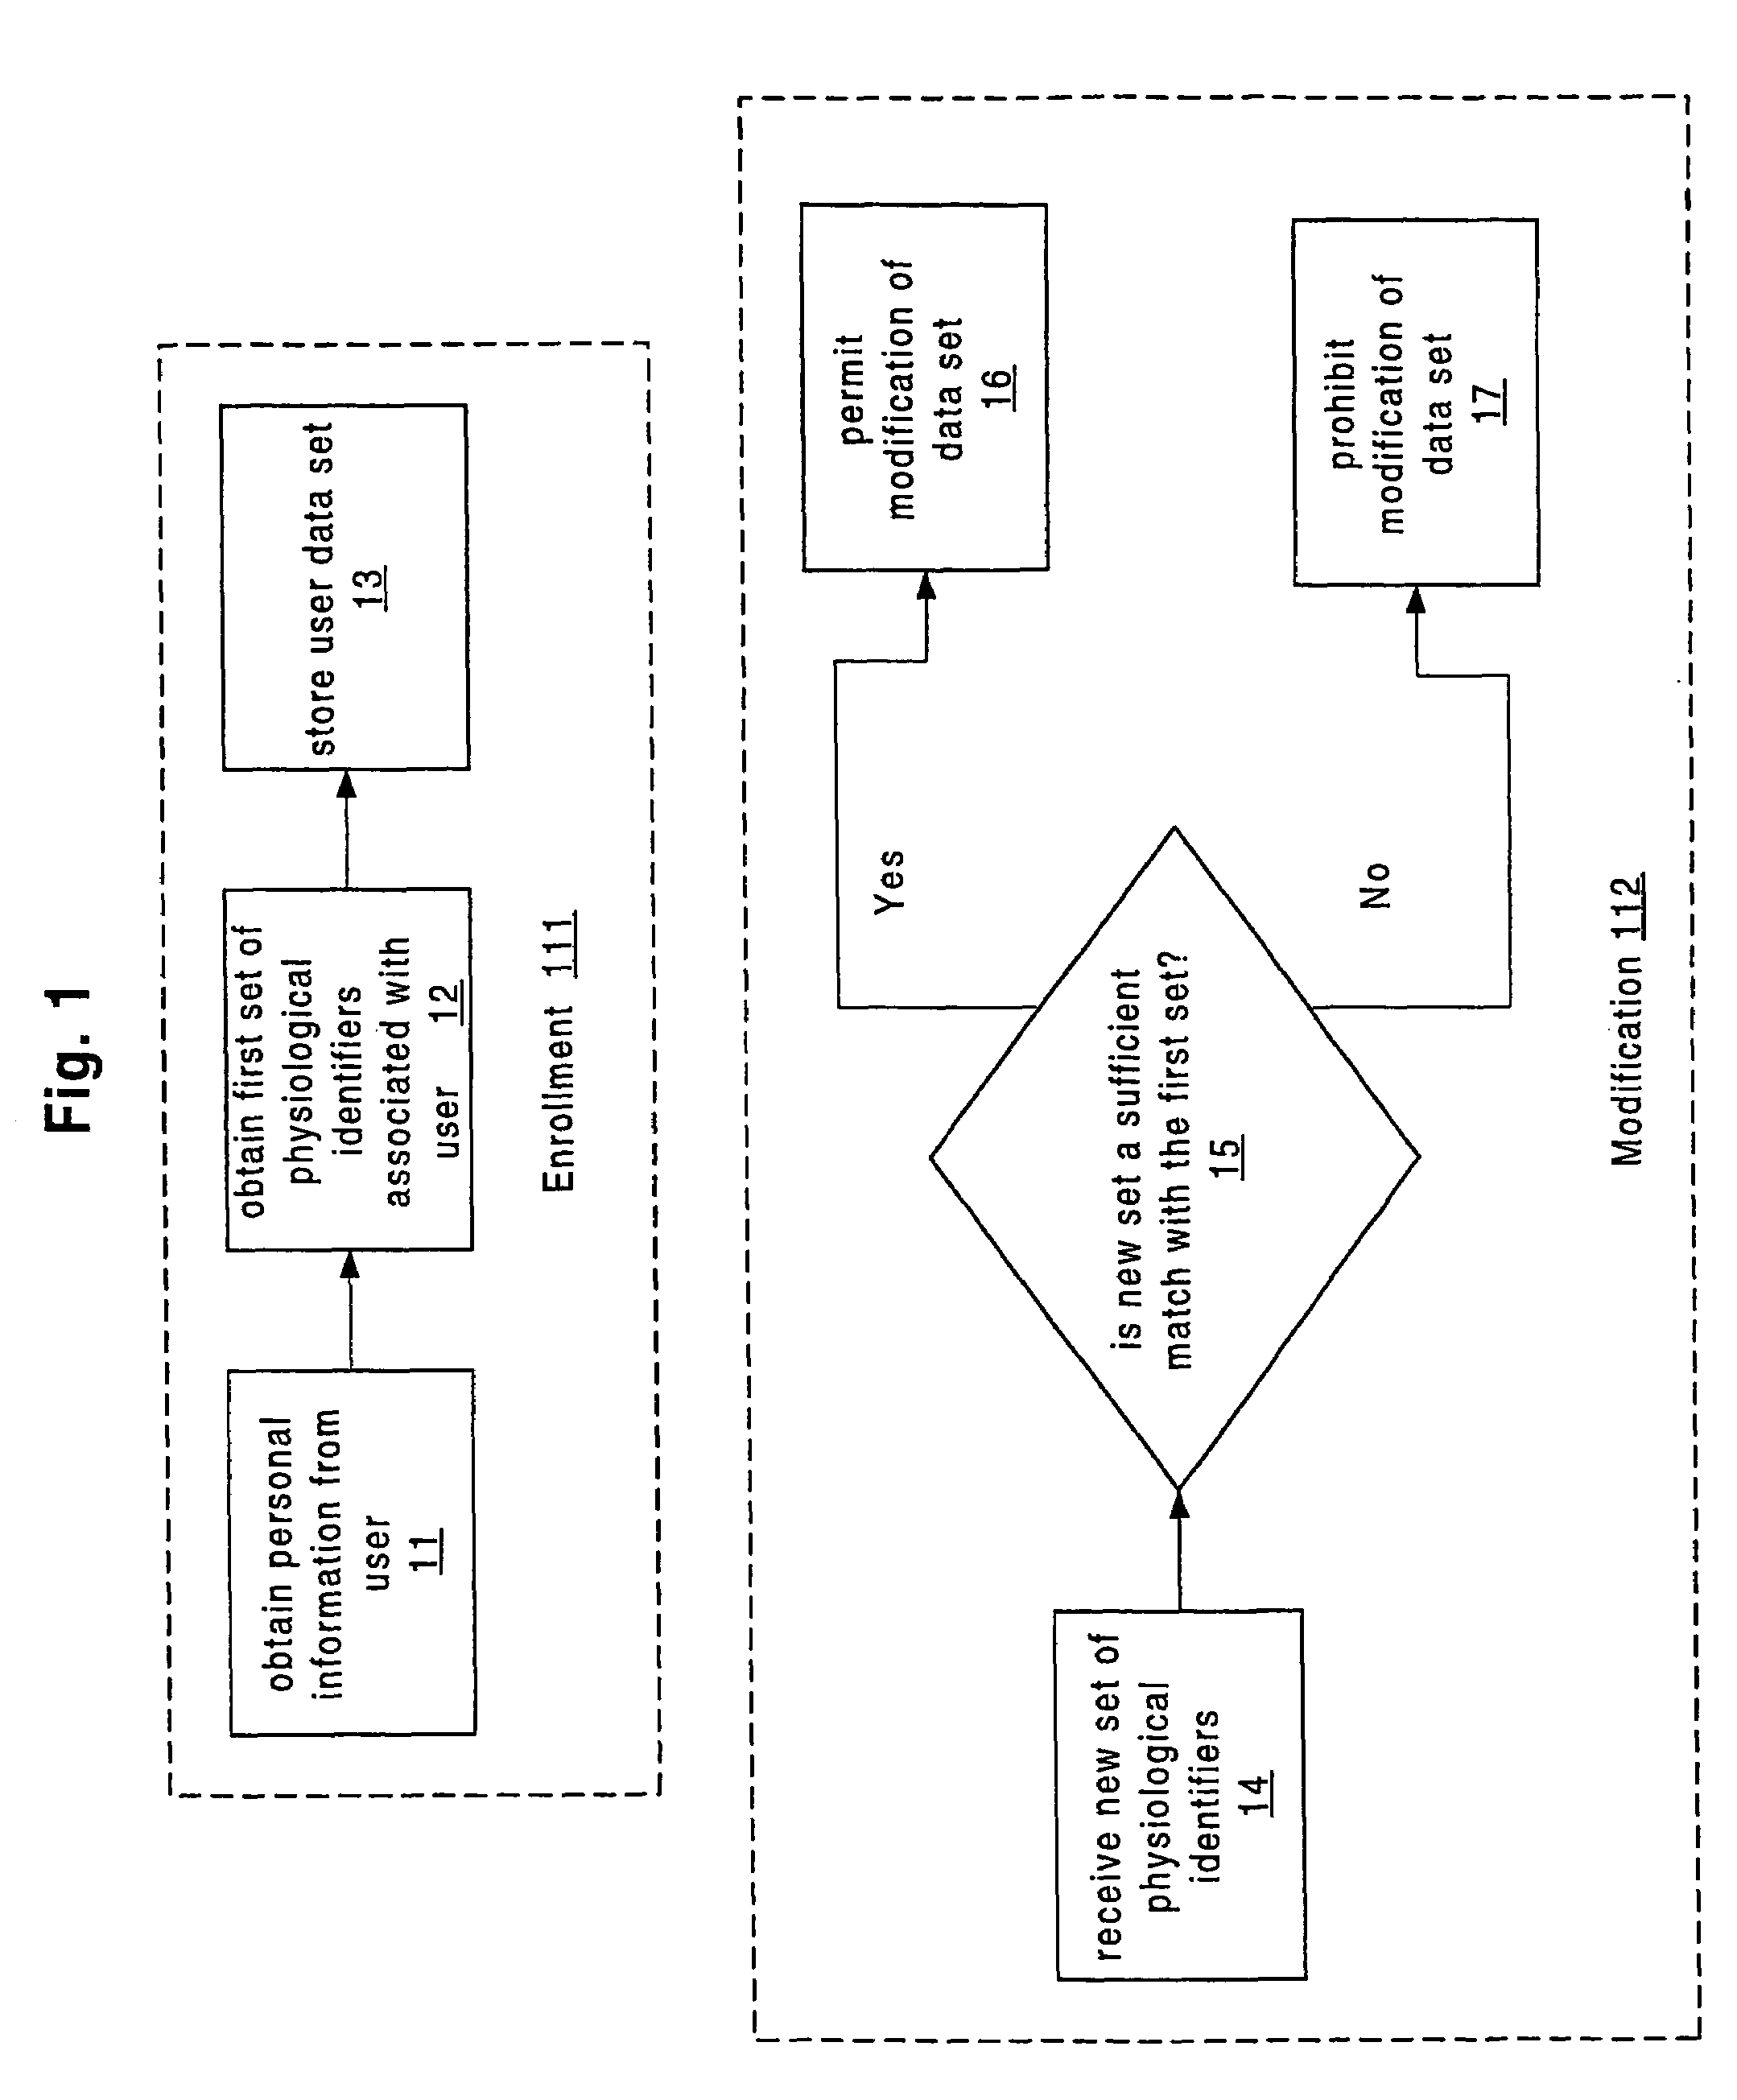 Apparatus and method for authenticated multi-user personal information database